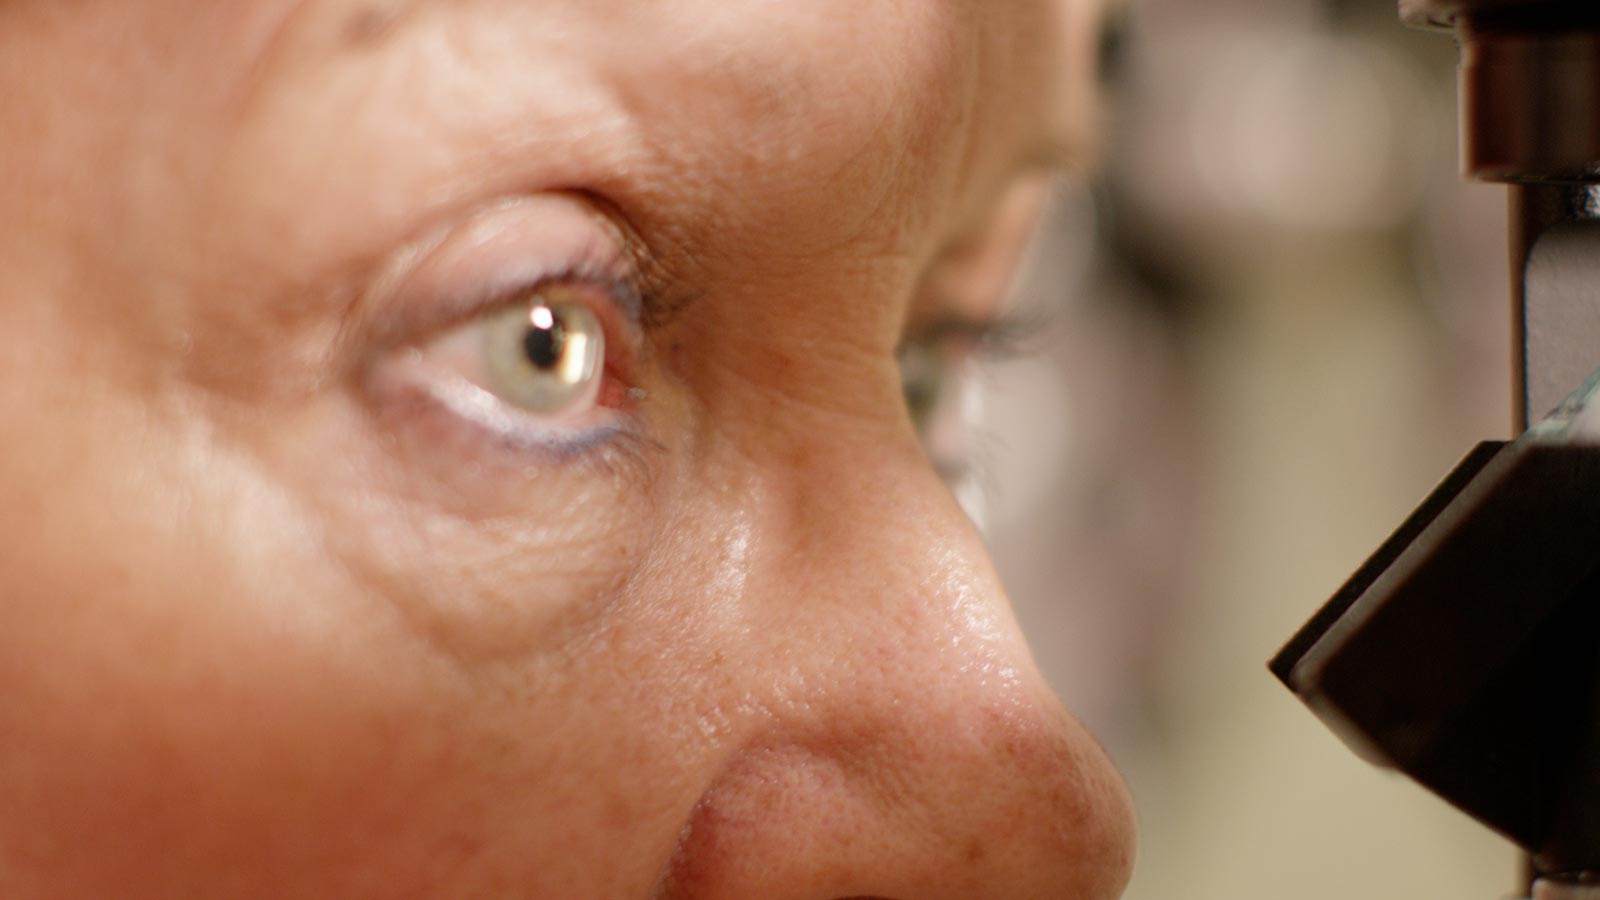 Up close view of a person eye